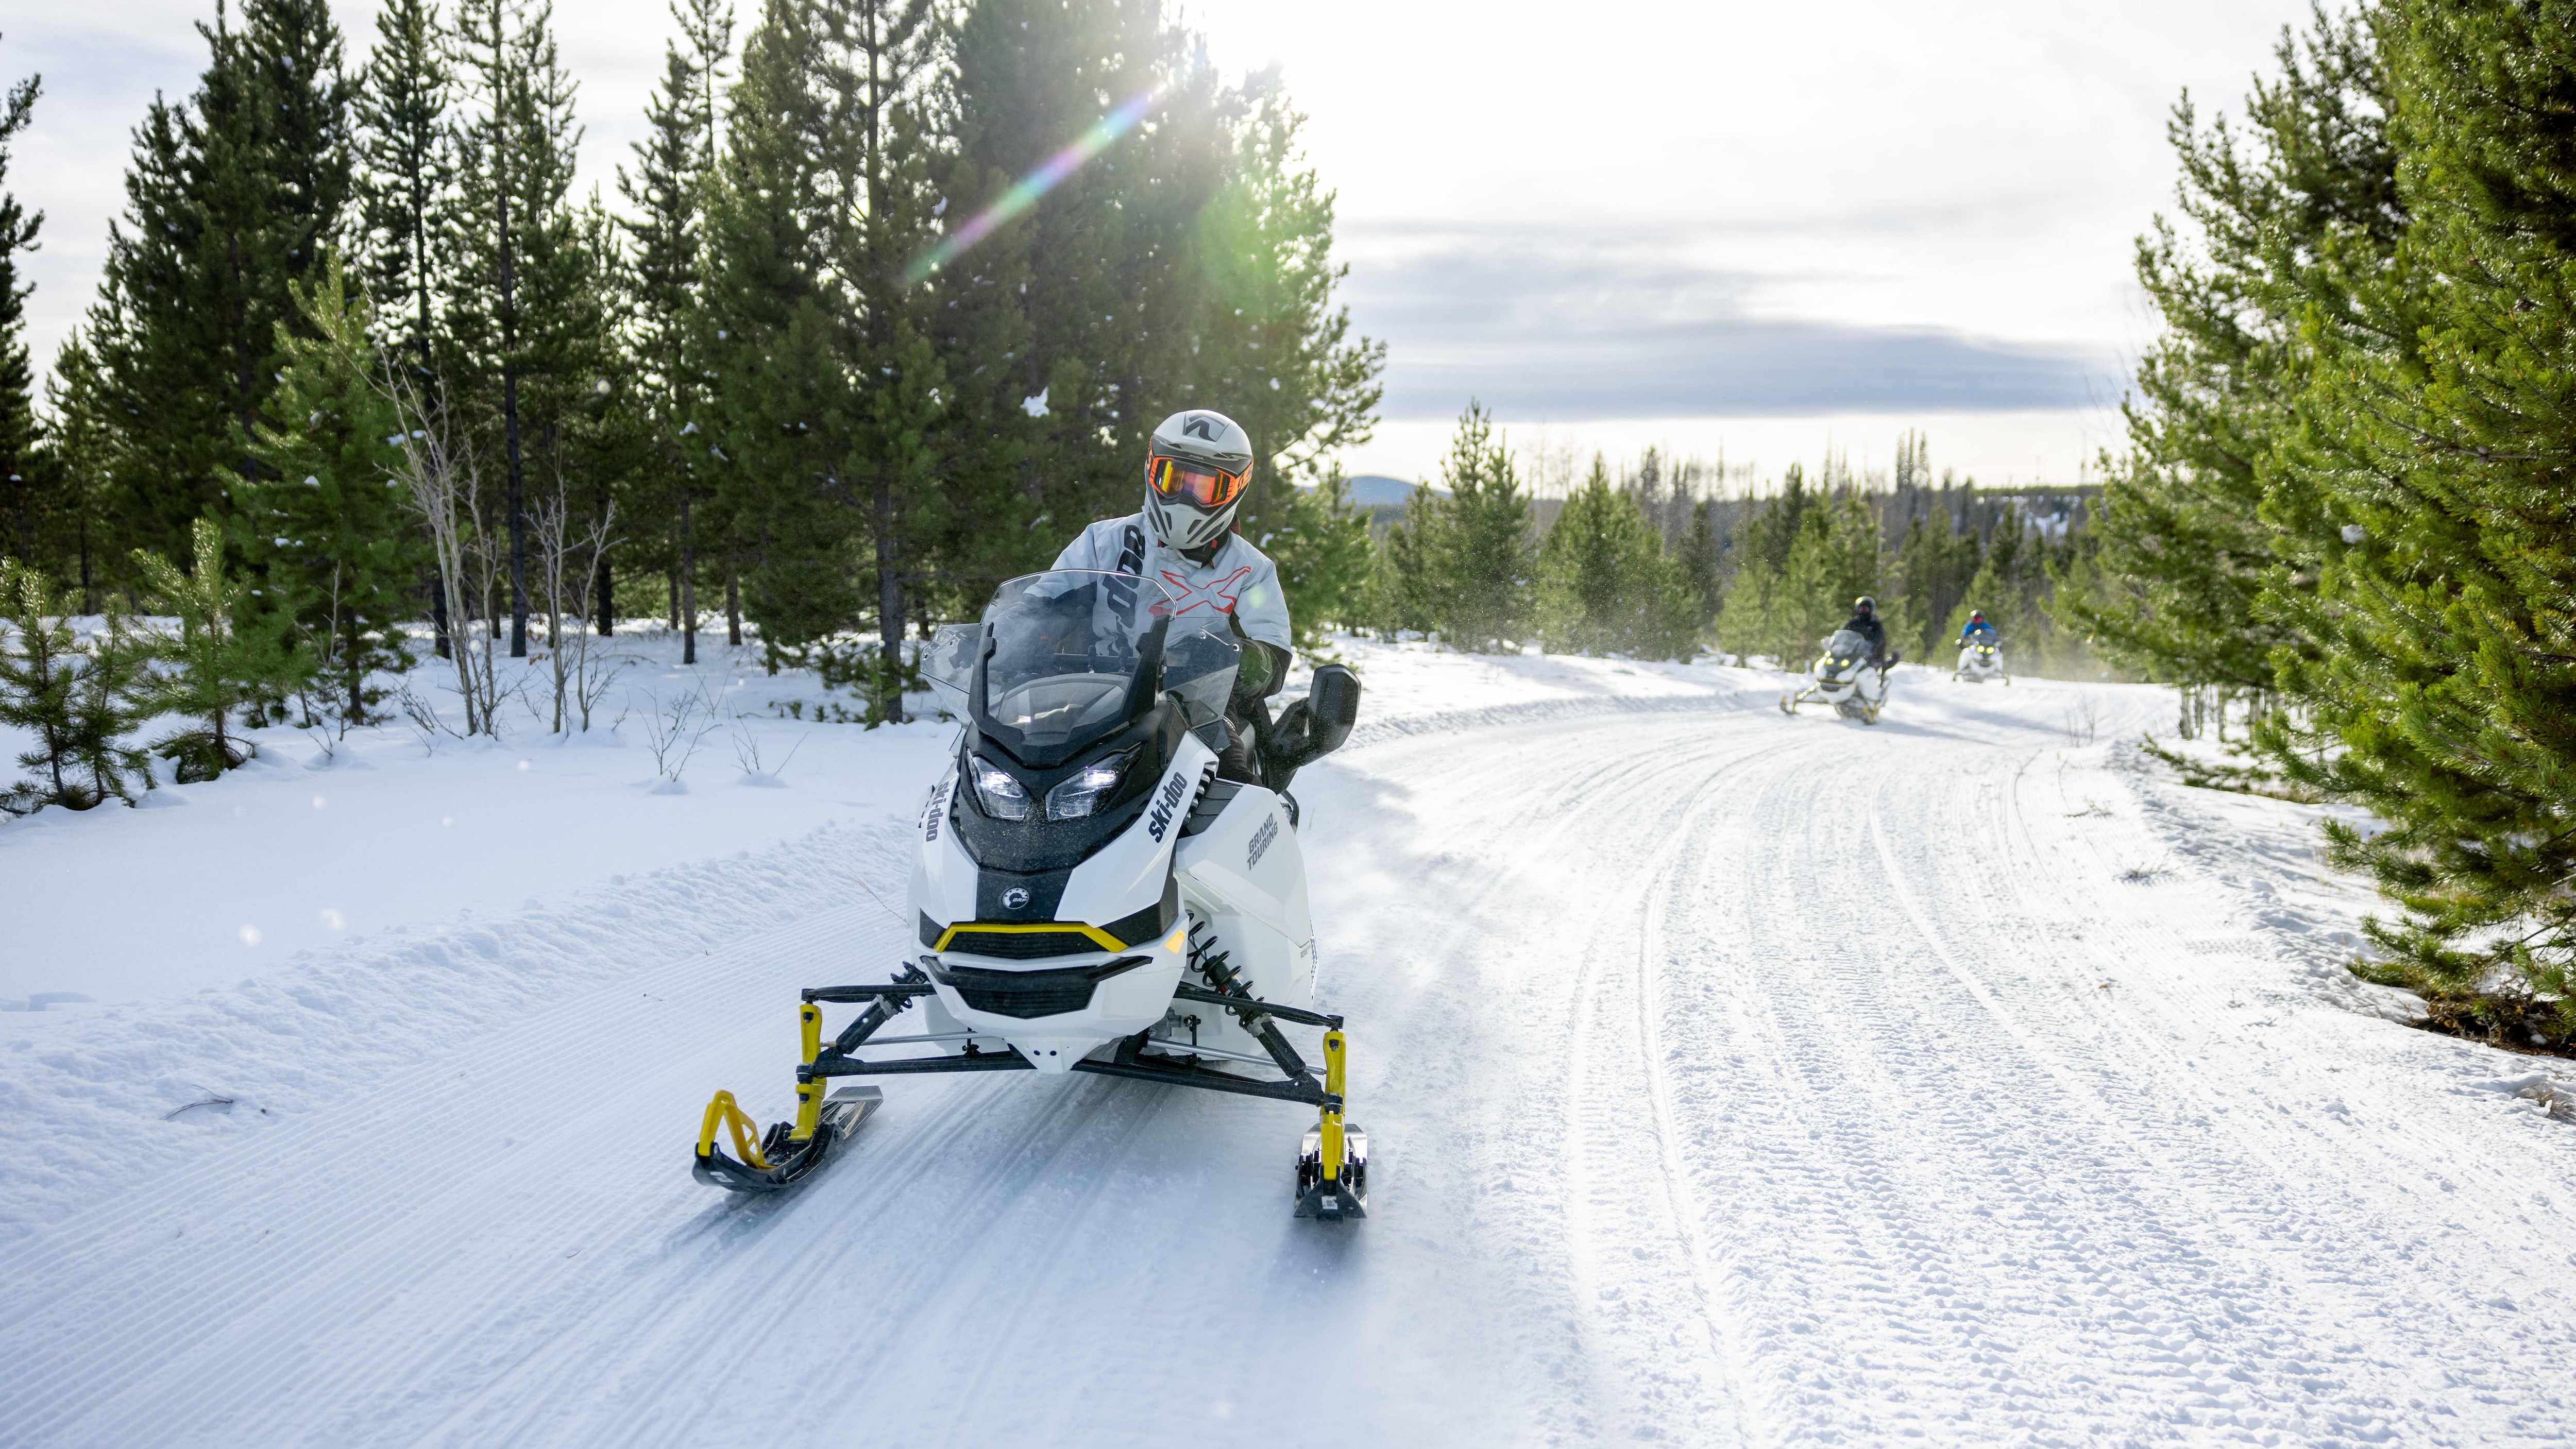 Two Ski-Doo snowmobiles on a groomed trail